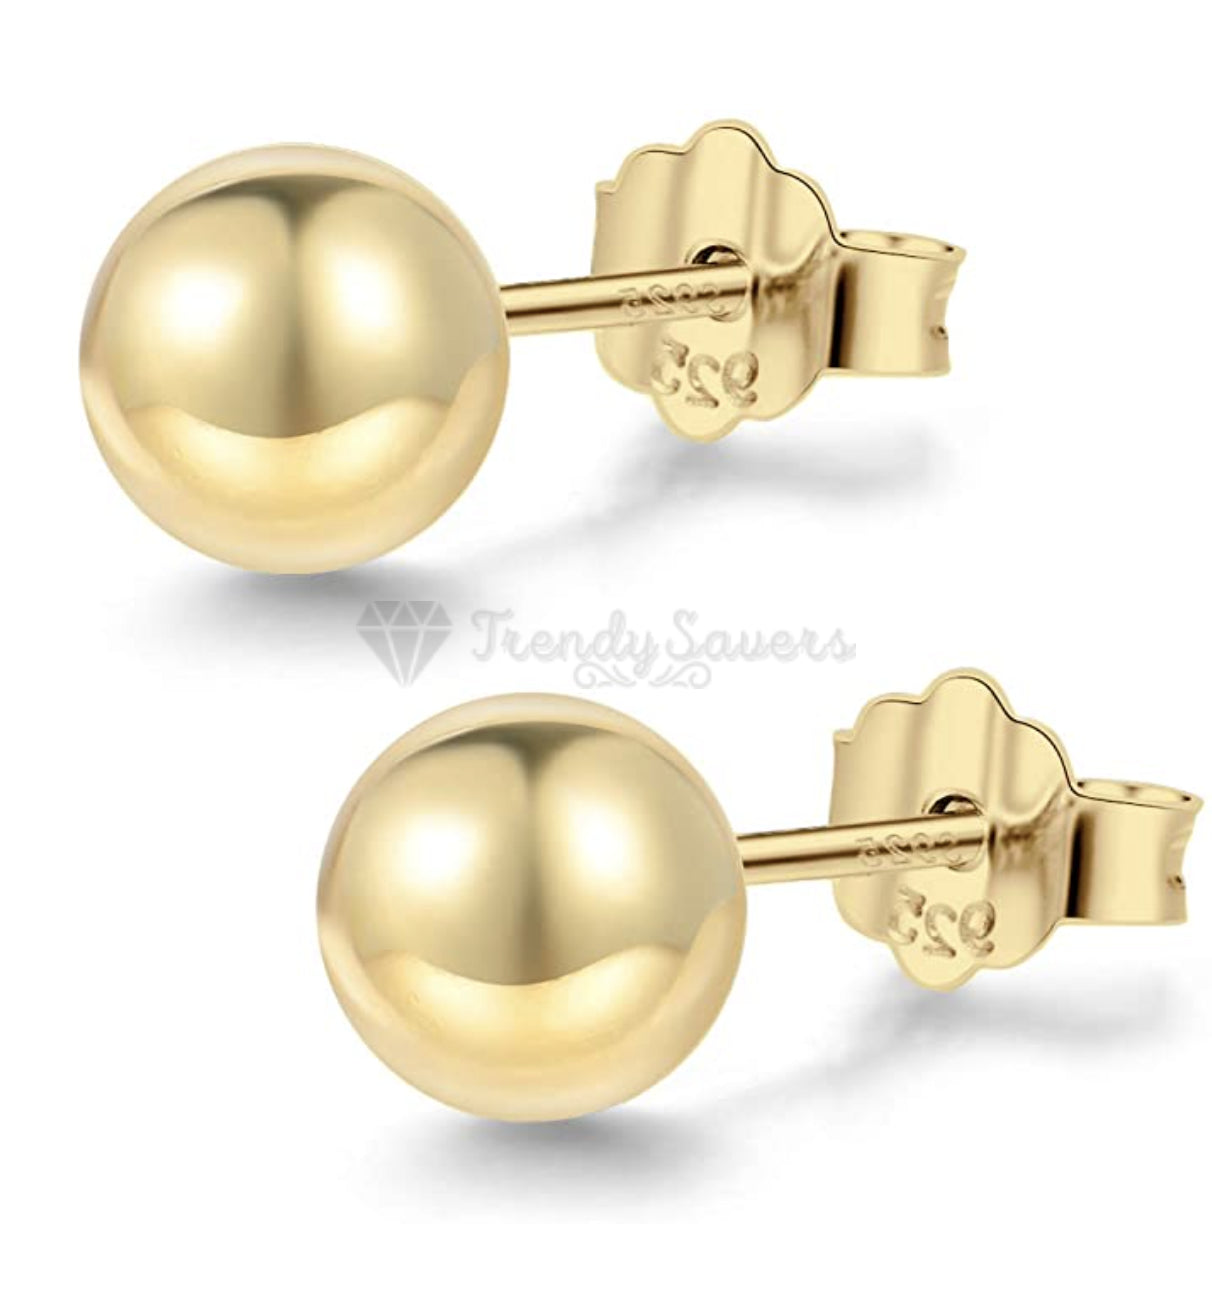 Simple Gold Polished 8MM Ball 925 Sterling Silver Stud Earrings Hypoallergenic